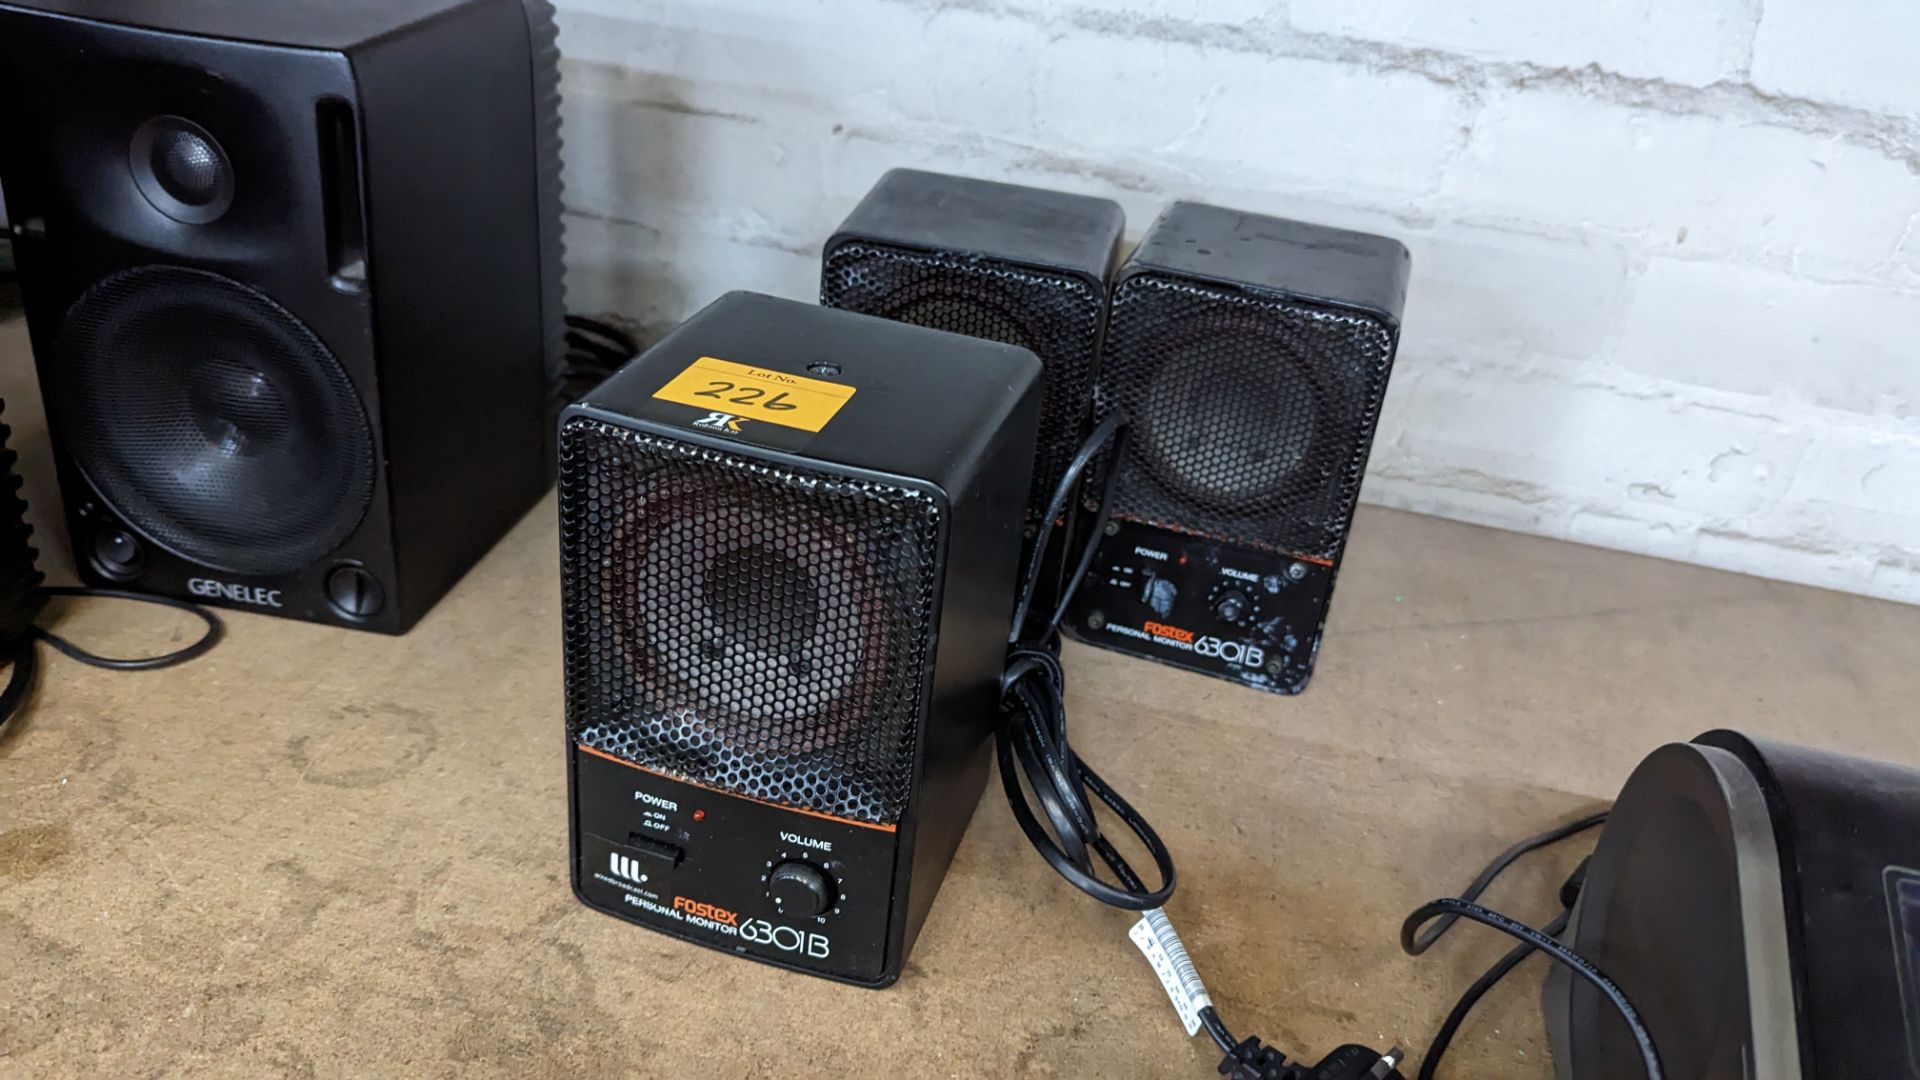 3 off Fostex personal monitor speakers, model 6301B. Please note the specification of each speaker - Image 2 of 8